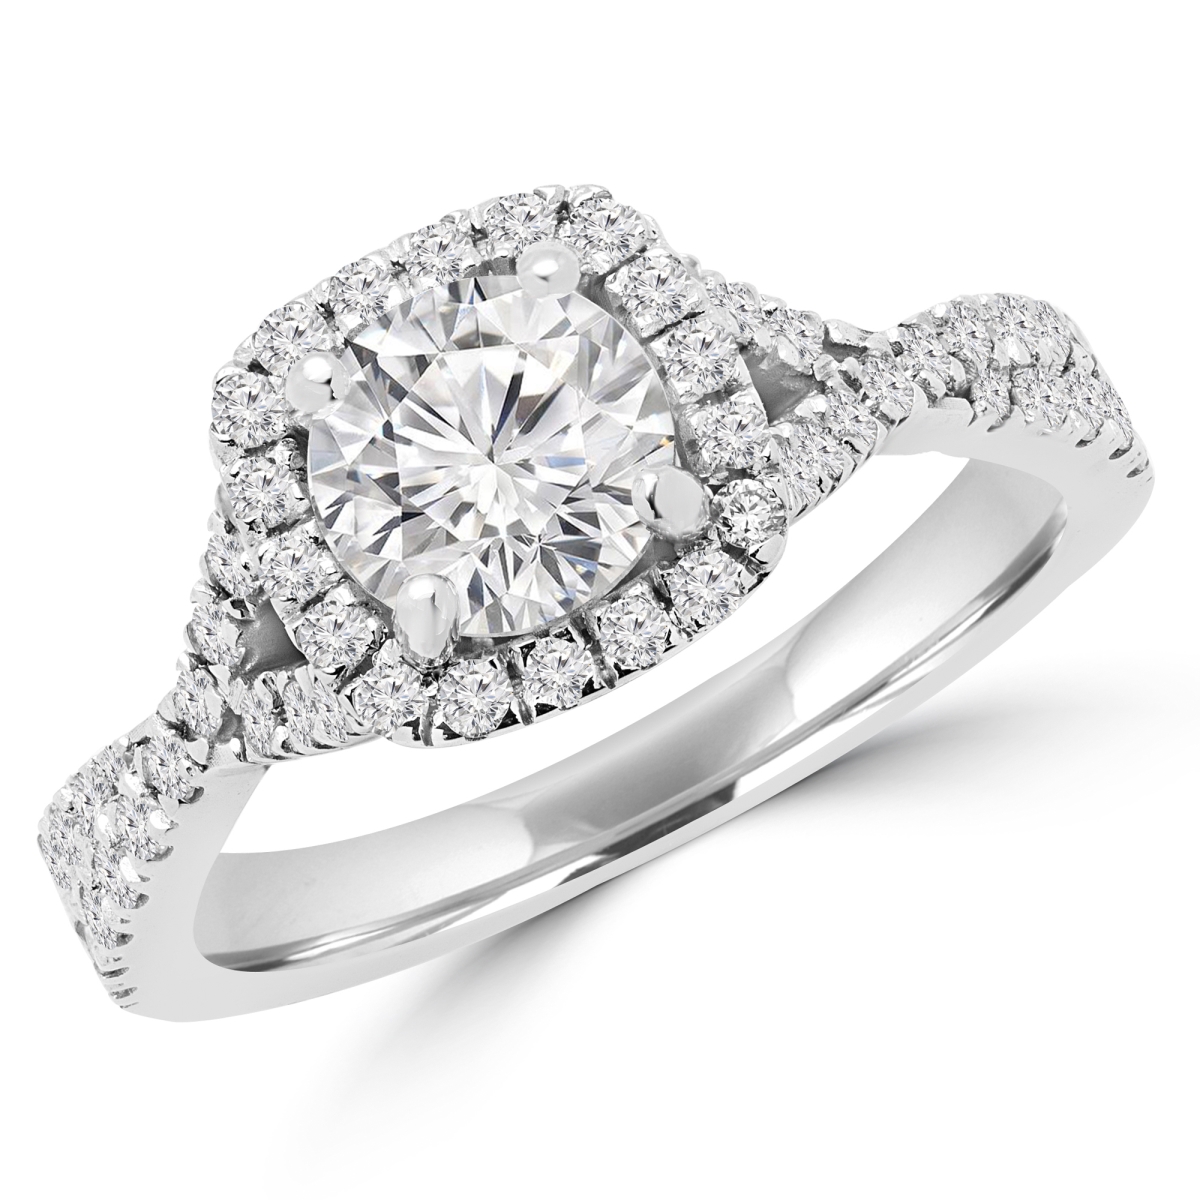 Picture of Majesty Diamonds MD170303 1.6 CTW Round Diamond Split ShanK Halo Engagement Ring in 14K